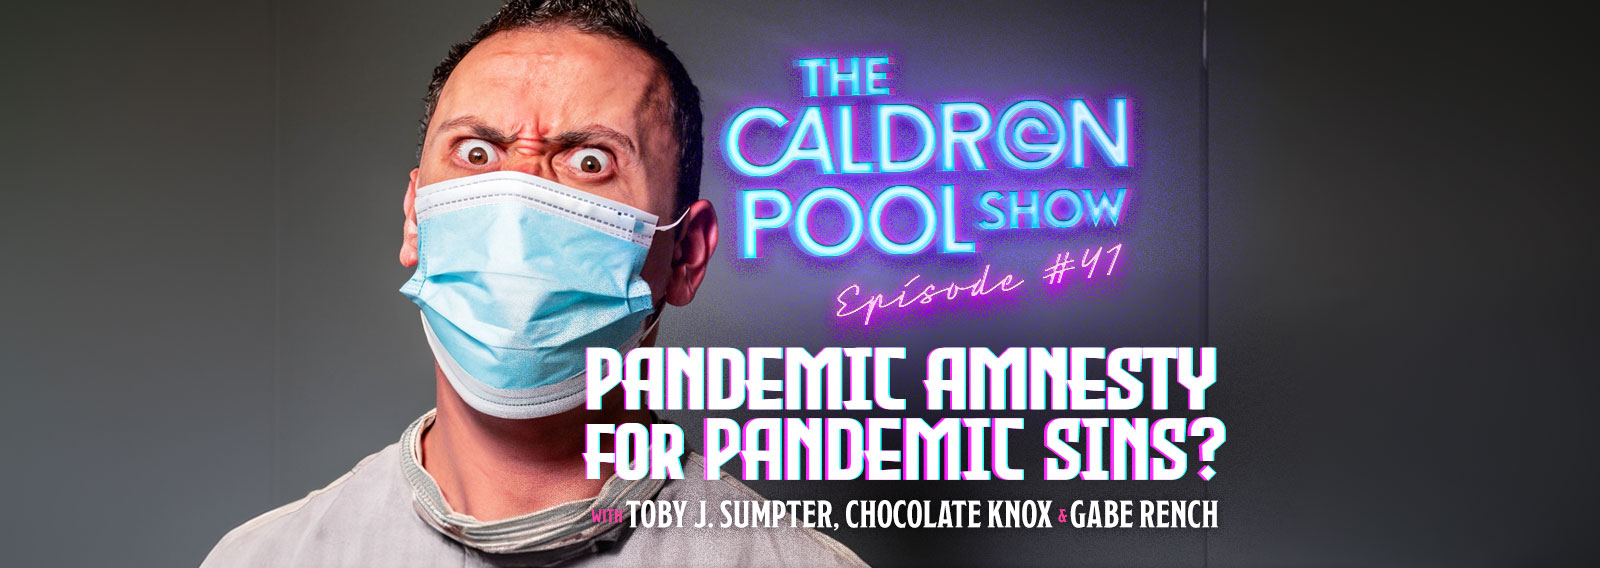 The Caldron Pool Show: #41 – Pandemic Amnesty for Pandemic Sins? With CrossPolitic